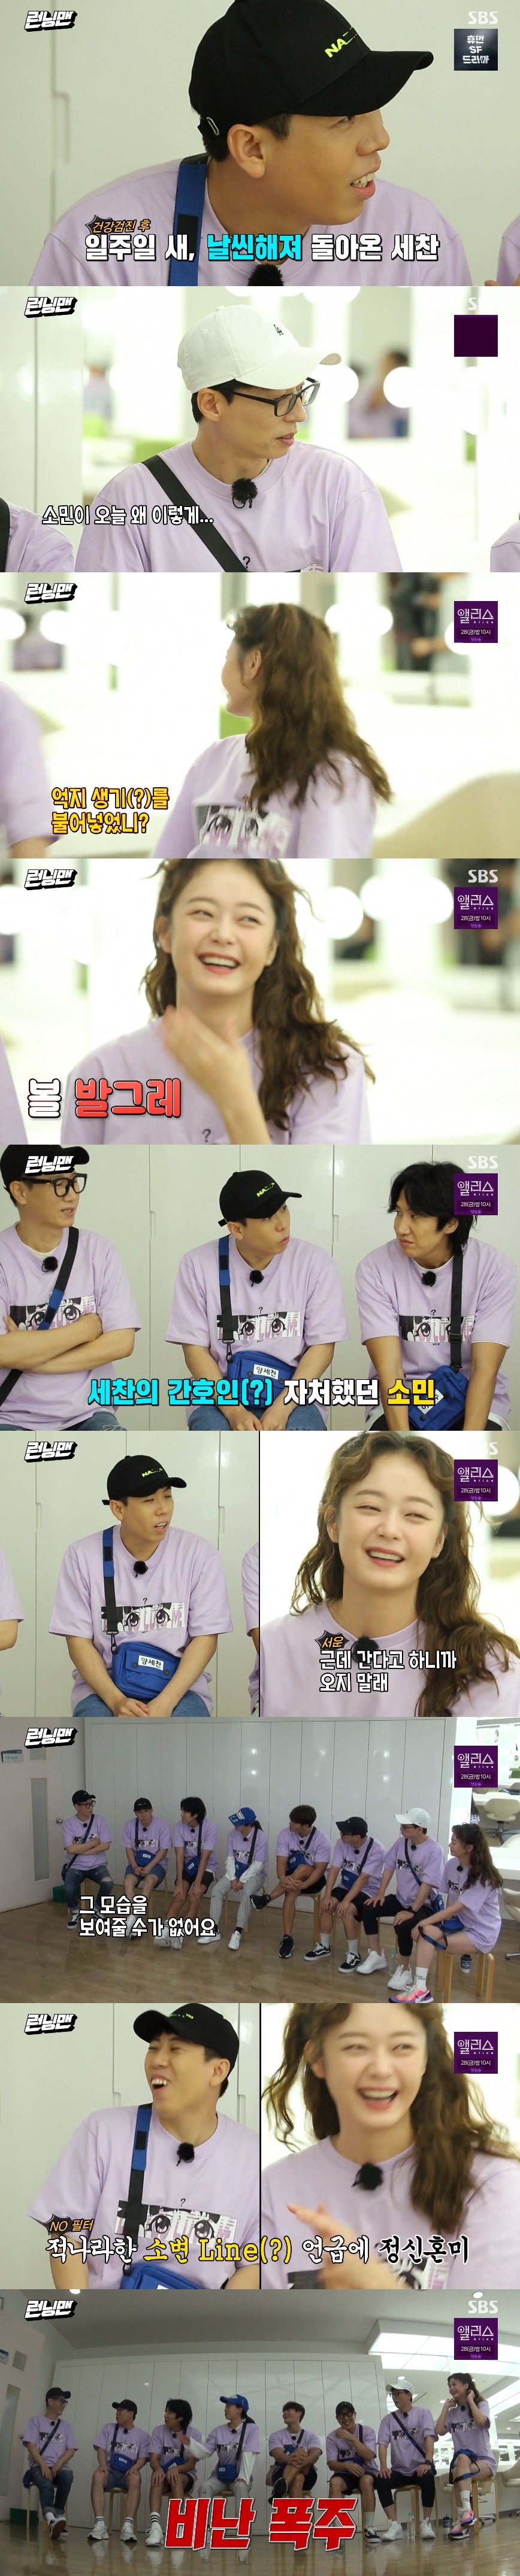 Seoul = = Running Man Jeon So-min still formed a pink atmosphere with Kim Dong-junLee Kwang-soo performed a round-back penalty with Ji Suk-jin, despite playing as a lonely killer.On SBS Running Man broadcast on the 23rd, members were drawn talking about the current situation. Ji Suk-jin said that he had been to Las Vegas.I have never been there, said Jeon So-min.Ji Suk-jin said, Ji Hyo and Somin will be very popular with men when they go to Las Vegas. I like Asian women very much.Winks are huge, Jeon So-min said, and when I went to Europe, I was winking in the mens market.Ji Suk-jin said, Will you look young? And Jeon So-min showed his reaction as a charm when he met Western men, saying, Oh no thank you biju biju.Ji Suk-jin also said, He would have shown a good response again, and Jeon So-min continued to be charming, saying, I close my eyes almost.Yang Se-chan has been a bit shy but has recently reported on his handsome visuals: Yang Se-chan has previously missed a recording of Running Man due to poor condition.The members admired Yang Se-chan, Im getting embarrassed, Im handsome.Yoo Jae-Suk pointed out excessive ball touch, saying to Jeon So-min, Why did you force you to live, and Jeon So-min said, Do not come because Im going to the hospital.Yang Se-chan said, I couldnt show you, but Ji Suk-jin asked, Did you have a urine line? to make the crowd laugh.Lee Kwang-soo also showed a recent skin burn while filming a movie: Lee Kwang-soo, who is currently filming the movie The Pirate Movie3.The members asked, Who is the main character of the movie? And Lee Kwang-soo replied, The river sky.Lee Kwang-soo was angry when the members asked, Is the sky coming out as Friend? Haha also said, Is the sky the best friend of the woman friend?, Lee Kwang-soo added, I can not say what I can not say because I am honest, I am a friend and a chewy person.After that, the members went to the room 1 to 8 to perform the full-scale mission, and the members formed a team of members who opened the door after the song euphemism.The final decision teams song average score was the teams score; it was a game that would be advantageous to form a team with members who would likely outperform their own.Yoo Jae-suk Song Ji-hyo Jeon So-min Haha Yang Se-chan teamed up, Kim Jong-kook Lee Kwang-soo teamed up, and Ji Suk-jin teamed up.The reversal led to a one-man team, Ji Suk-jin, who scored a maximum of 88 points and started at No.But Kim Jong-kook and Lee Kwang-soo decided to split up ahead of the full-fledged game, lifting the lock link.The next game is I live to be broken, and the higher the team average score, the more favorable the corner.You have to unlock the lock and terminate the connection, and the team that has the highest average score in the final will have the product.Each mission has a team with an average score of one or more penalty malls with their names added.Then, a game was held to stick sticker as far as possible from 4m high.The game sequence was in the order of age, and the average age started with Lee Kwang-soo.Lee Kwang-soo looked giddy as he climbed 4m high, with the crew stressing it was safe but trembling in an anxiously shaken styrofoam.As time was delayed due to Lee Kwang-soo, members accused The Pirate Movie is what! Return the channel and Come down if youre going to do it.Eventually Lee Kwang-soo shouted, Dont turn the channel, and You do it.Lee Kwang-soo tried to take the courage but crashed down the broken styrofoam and laughed.Afterwards, Yoo Jae-Suk climbed 4m high with his team members, and he also laughed at the dizzy height that he could see even if he took off his glasses.He asked me to play Kang music, and carefully geared the sticker to 294cm away, but Haha crashed down and made the crowd laugh.Song Ji-hyo then succeeded in sticking the farthest stickers, and Yang Se-chan bravely led but failed to get the mission because he did not stick as he crashed down.In the next order, Jeon So-min was afraid to ask, Do you want to go out if you pee? But when the members thought that Kim Dong-jun was at the end, they shouted, Dong Jun-a sister goes and laughed.In the end, Jeon So-min succeeded in sticking a sticker at 330cm, the longest distance than Song Ji-hyo, and shouted I did it because of Dong Jun.Kim Jong-kook, who recorded 315cm in the game result, won the first place.The second place was Ji Suk-jin, who recorded 280cm, and the team consisting of Yoo Jae-Suk Haha Yang Se-chan Song Ji-hyo Jeon So-min was 244.8cm, third place.Kim Jong-kooks Choices, who later won first place, formed a team with Yoo Jae-Suk and Yang Se-chan, while Haha and Song Ji-hyo Jeon So-min formed another team.They went to the Scissors, Rocks and Paper Game, which hangs a menu of beef ribs.Whether it was easier than expected was Lee Kwang-soo in the Scissors, Rocks, and Paper Game, the second place was Haha Song Ji-hyo Jeon So-min team, the third place was Yoo Jae-Suk Yang Se-chan team, followed by Kim Jong-kook, Ji Suk-jin This is the last place.The next game is a game that collects table tennis balls while keeping balloons, and the ranking is determined by the average number of table tennis balls by team.Five balloons per person and 30 bullets per team are given, and a team with a lot of team members is advantageous to survive for a long time.Lee Kwang-soo, who was divided into lonely killers, said there were no bullets, but Yoo Jae-Suk Yang Se-chan ran away after three balloons of two people in a careless gap.Haha also then burst all of Yang Se-chans balloons, and the first dropout became Yang Se-chan; Haha and Song Ji-hyo were subsequently eliminated in turn.Jeon So-min hid under the desk and defended, but was eventually shot and dropped by Kim Jong-kook.Eventually, Yoo Jae-Suk Kim Jong-kook formed a coalition to overthrow Lee Kwang-soo.In the meantime, Ji Suk-jin showed a reversal of shooting Kim Jong-kook.Ji Suk-jin then shot a balloon from Yoo Jae-Suk, and eventually the union collapsed when Yoo Jae-Suk was eliminated.In the meantime, Lee Kwang-soo preempted the rooftop highlands and aimed at Kim Jong-kook Ji Suk-jin.Lee Kwang-soo, who was in full-scale combat, and Kim Jong-kook and Ji Suk-jin, but Igoasu fell on the stairs and was overpowered by Kim Jong-kook.Kim Jong-kook was placed first, and Ji Suk-jin Lee Kwang-soo was penalized; the penalty was to retrieve 28 casings while wearing a link.Eventually, they struggled to retrieve all the casings.